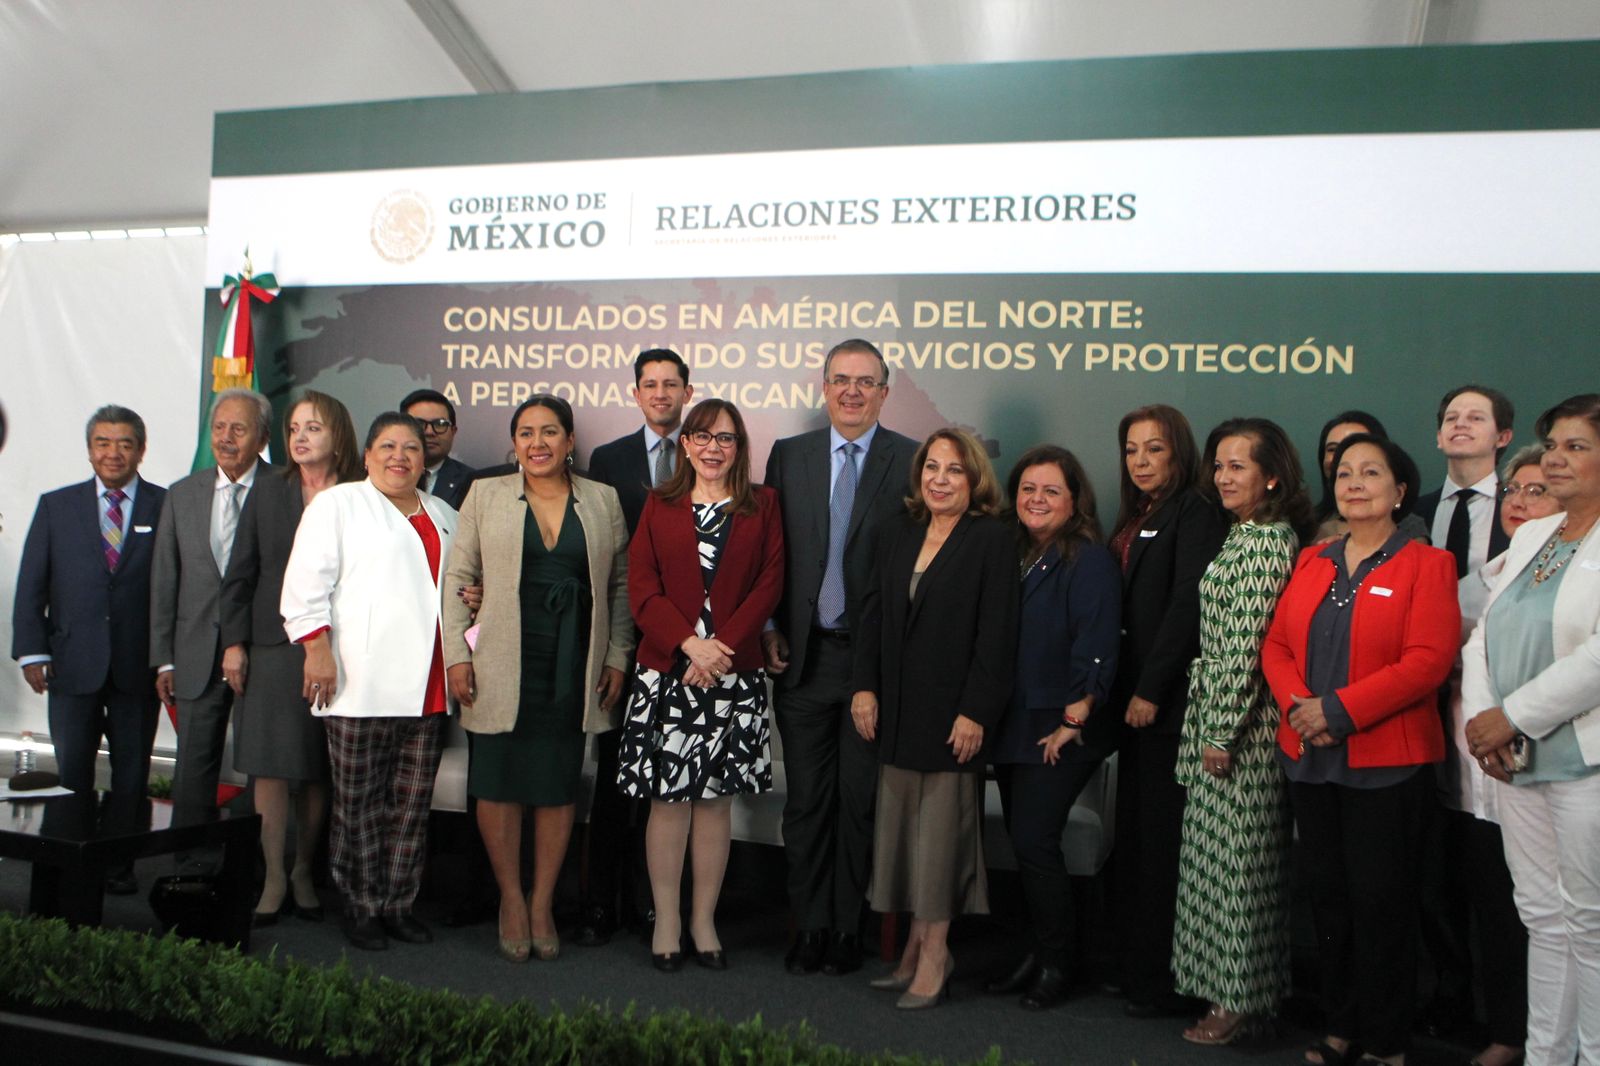 Foreign Secretary Ebrard announces transformations to Mexico’s consular services to increase protection for Mexicans abroad